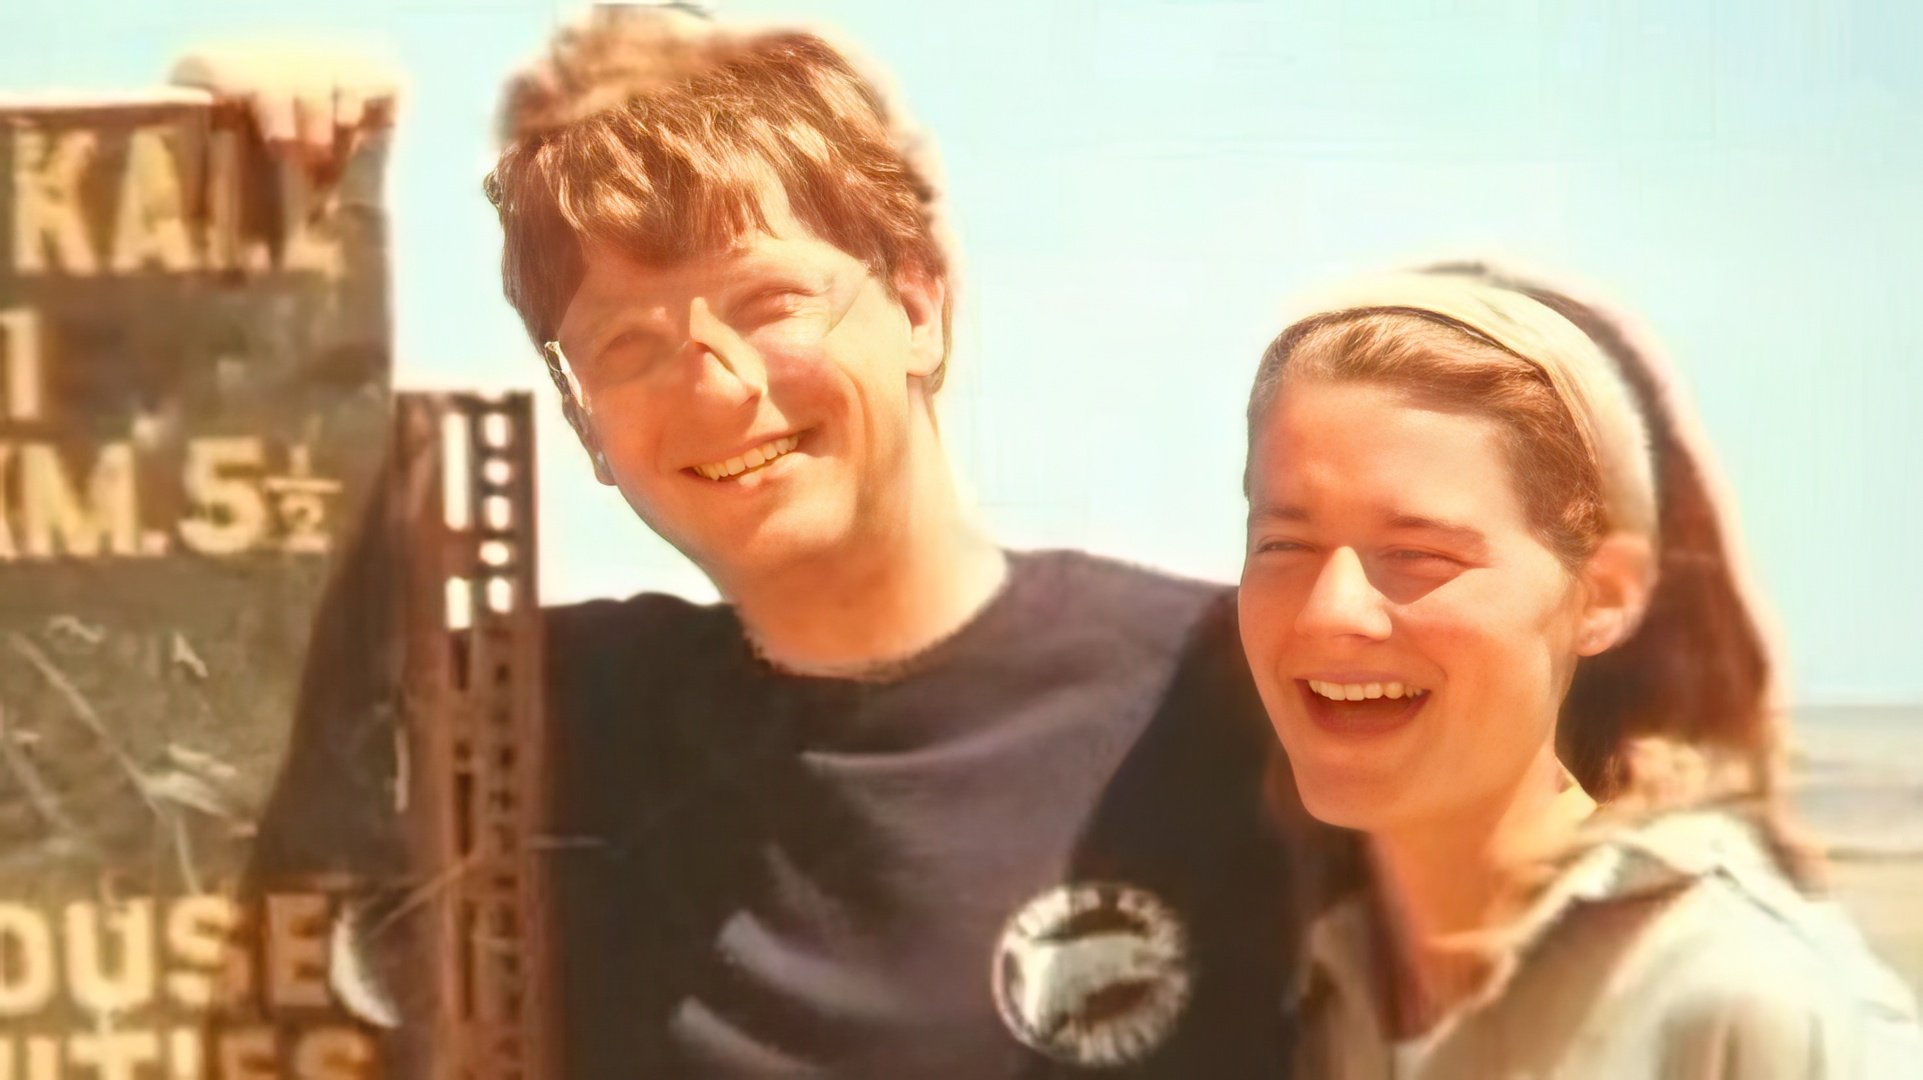 Bill and Melinda Gates in their younger days